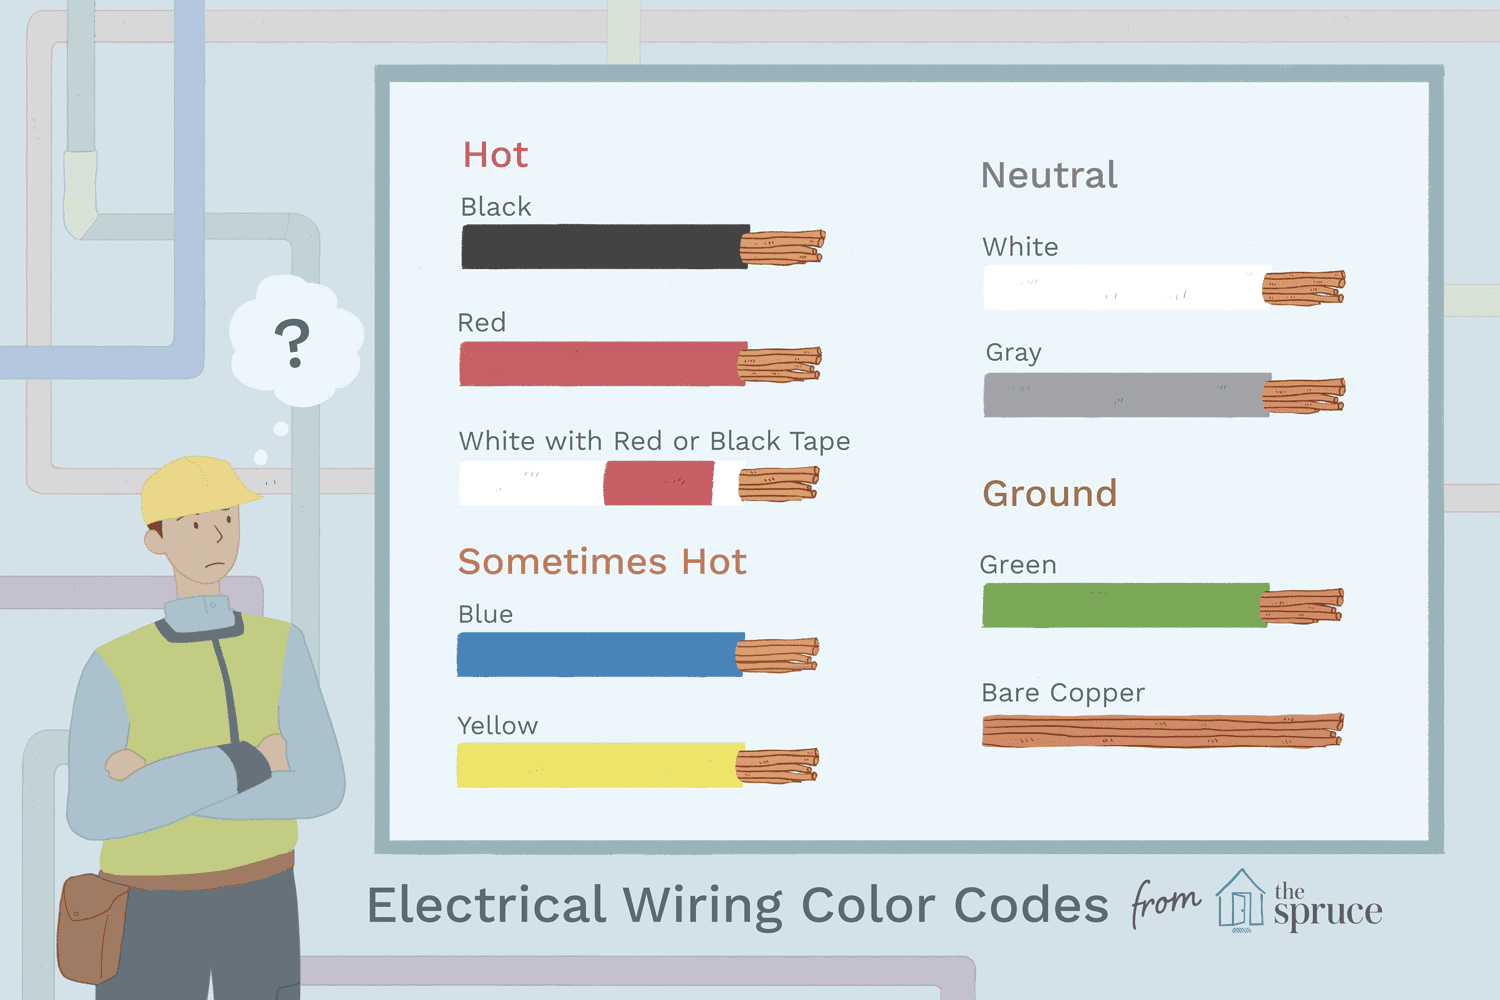 Electrical Wiring Color Coding System - Wiring Diagram Color Codes